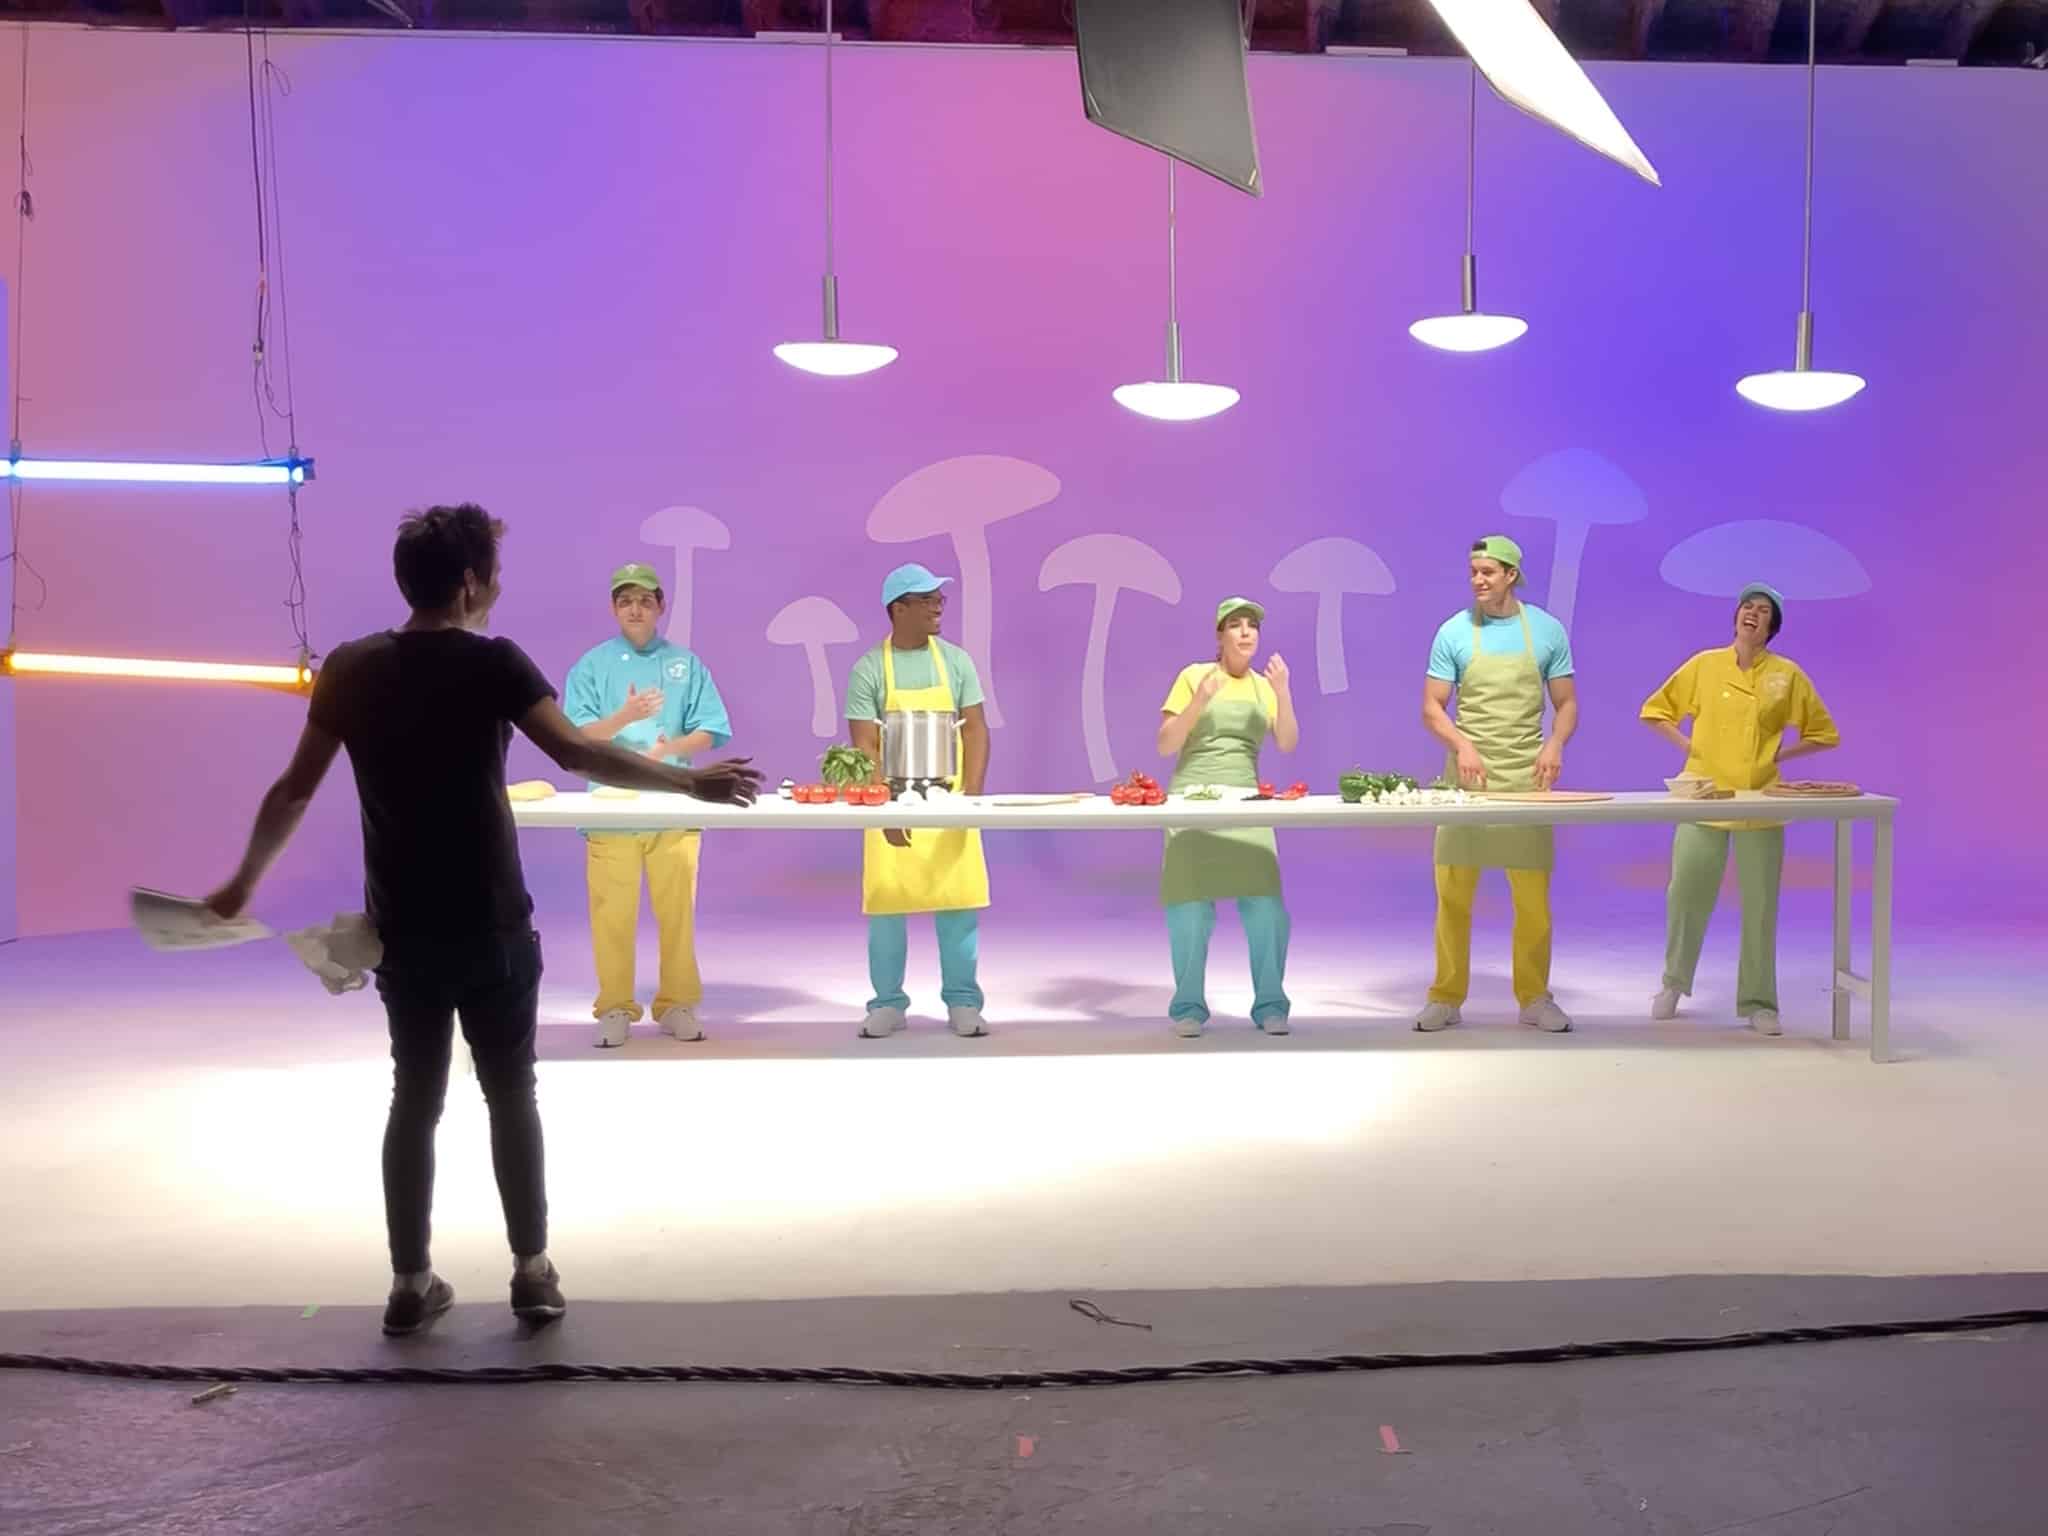 Pizza Commercial BTS In New Orleans